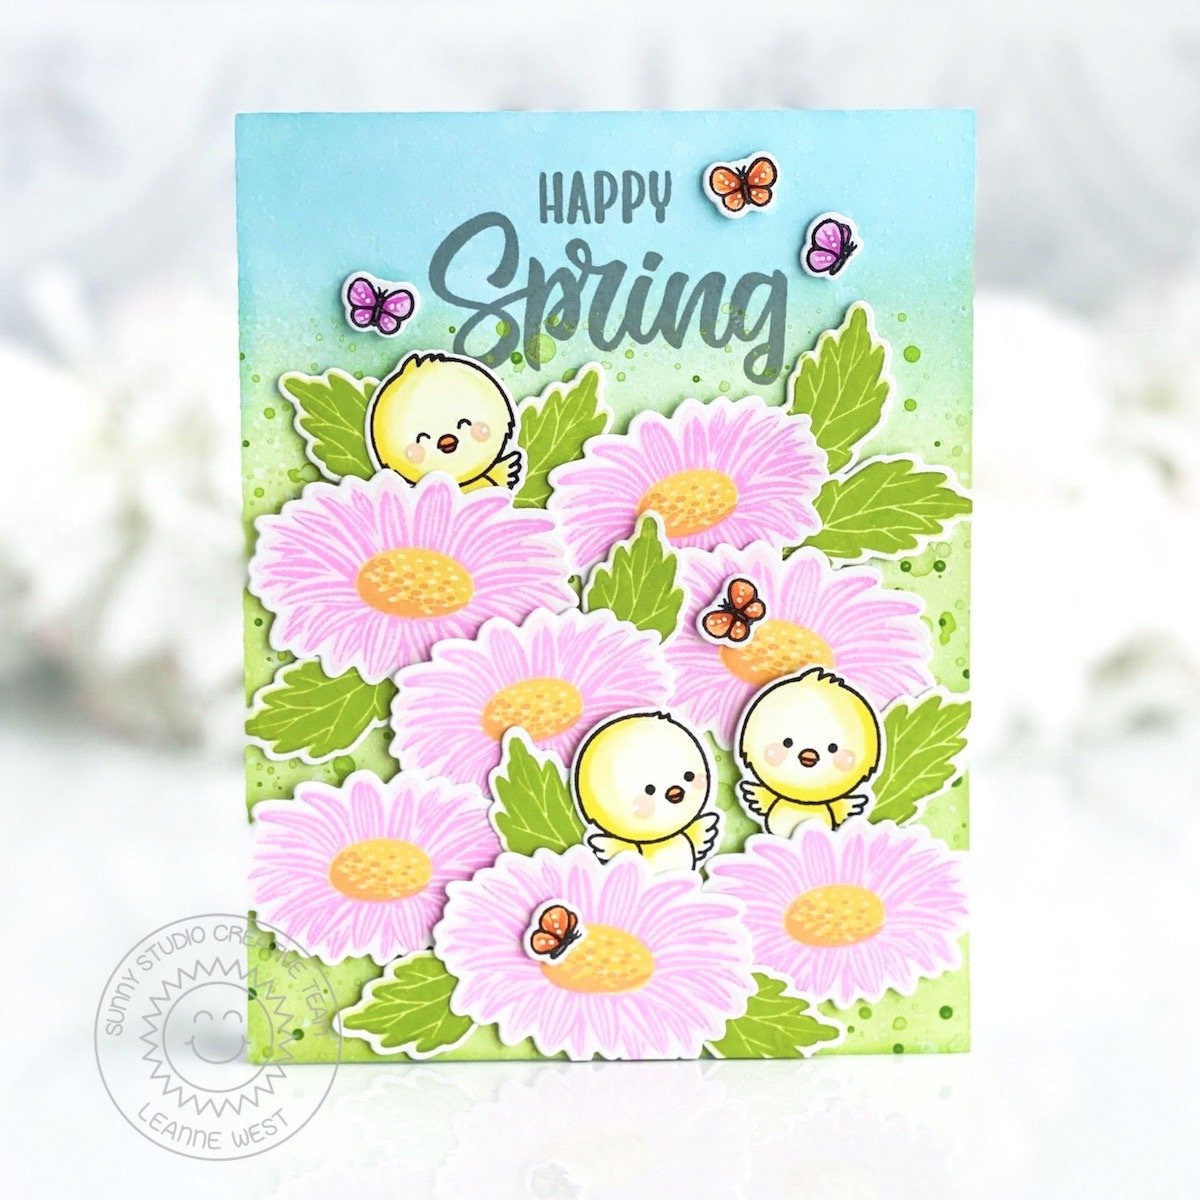 Sunny Studio Spring Easter Chick in Daisy Patch Handmade Spring Card by Leanne West using Chickie Baby 4x6 Clear Stamps